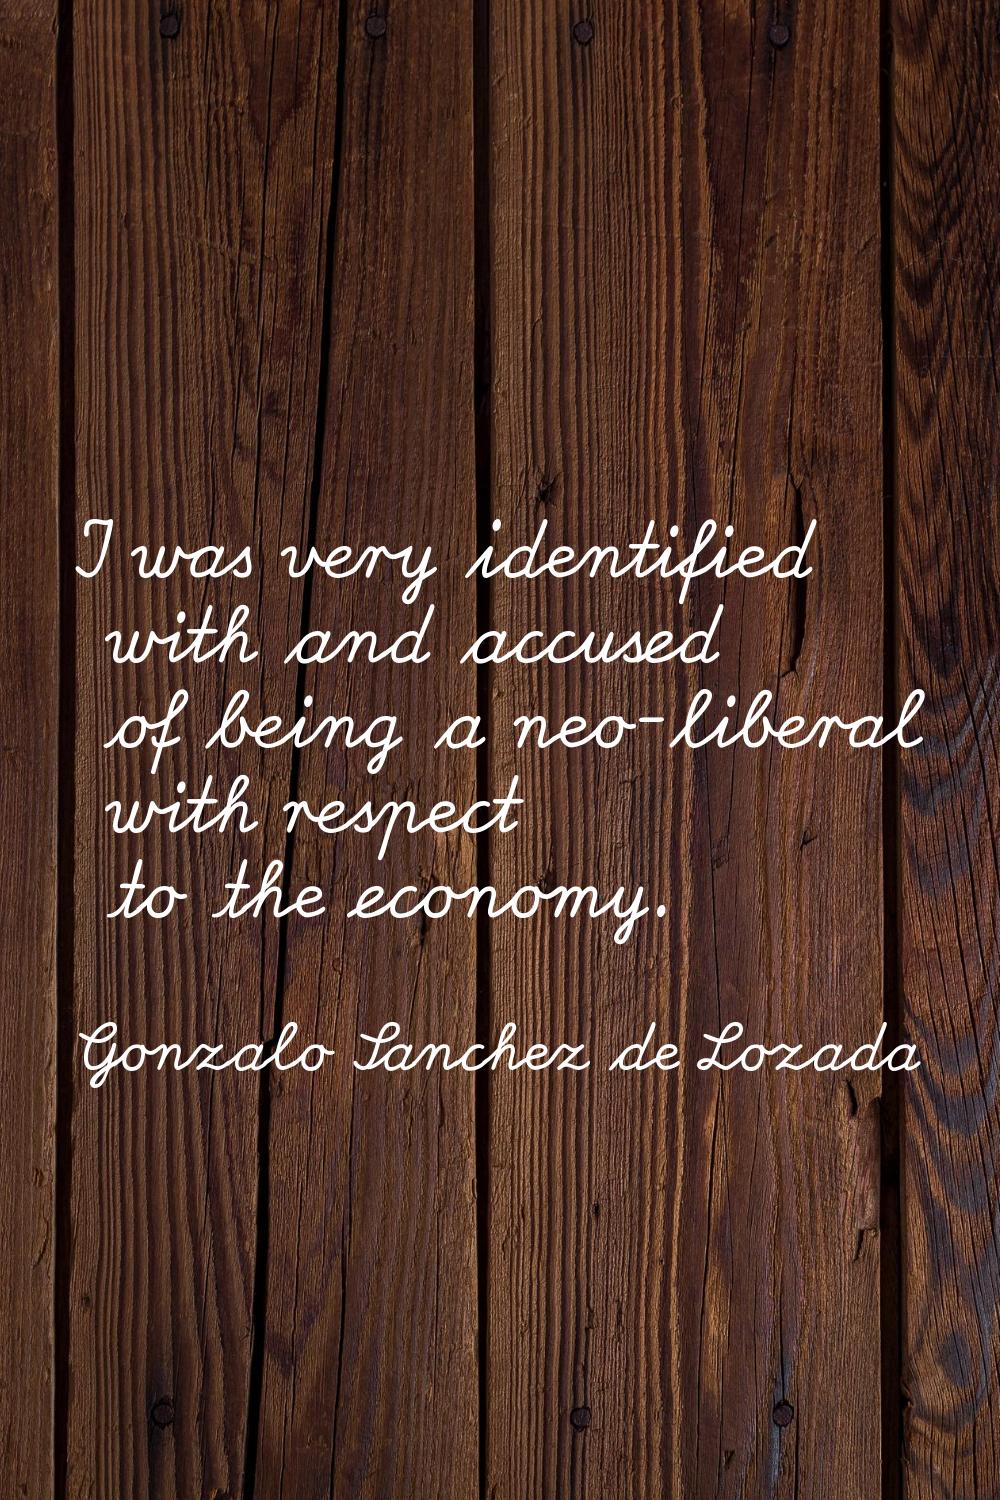 I was very identified with and accused of being a neo-liberal with respect to the economy.